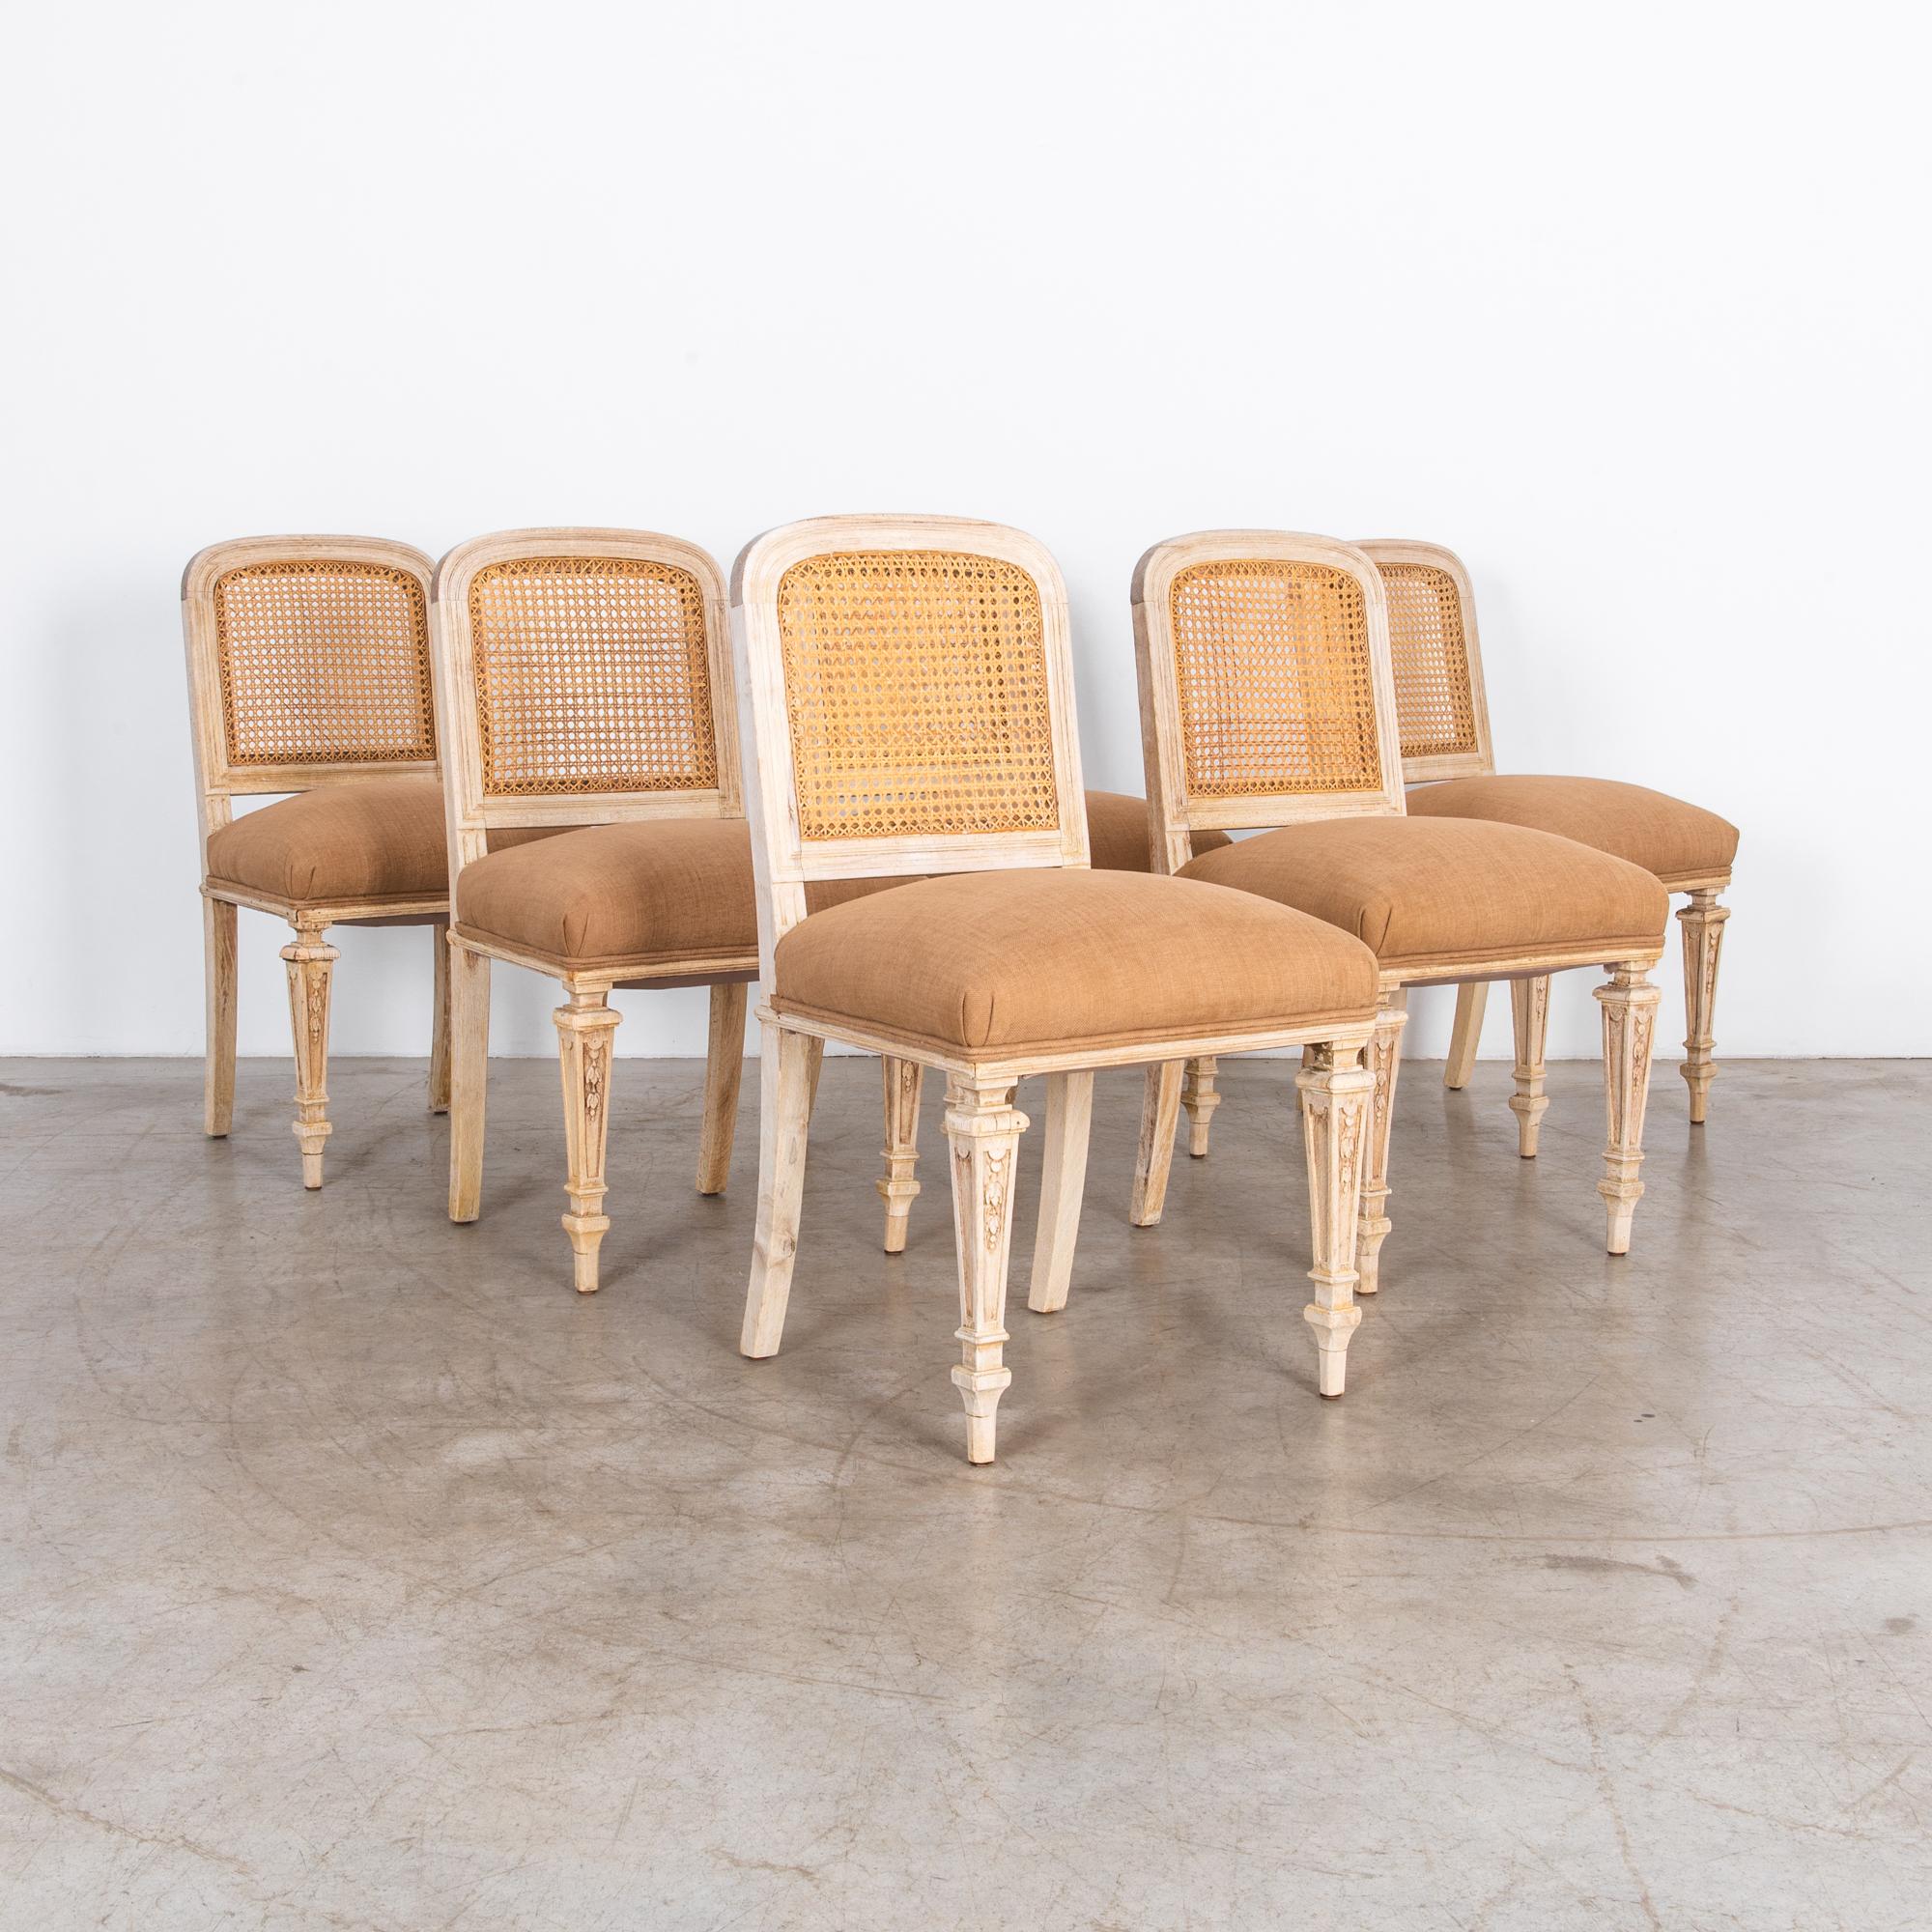 With a warm hue, and comfortable reupholstered seat, these French dining chairs are formal yet inviting. Solid oak frame and woven seat back, the natural materials blend ochres colors, emphasised by the cotton-linen fabric seat. Carved details and